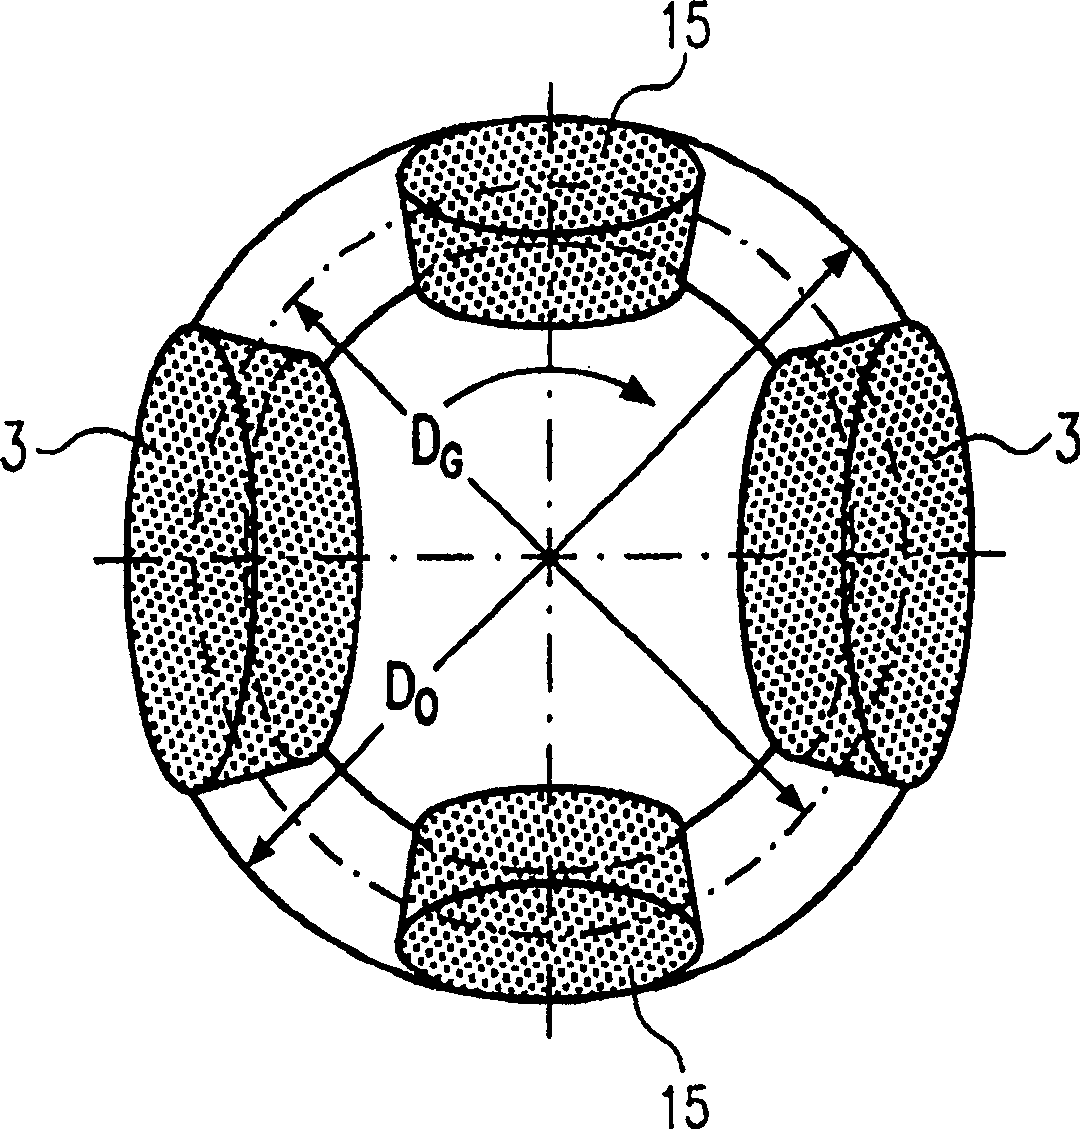 Roller grinding mill and method for grinding materials that contain magnetizable components